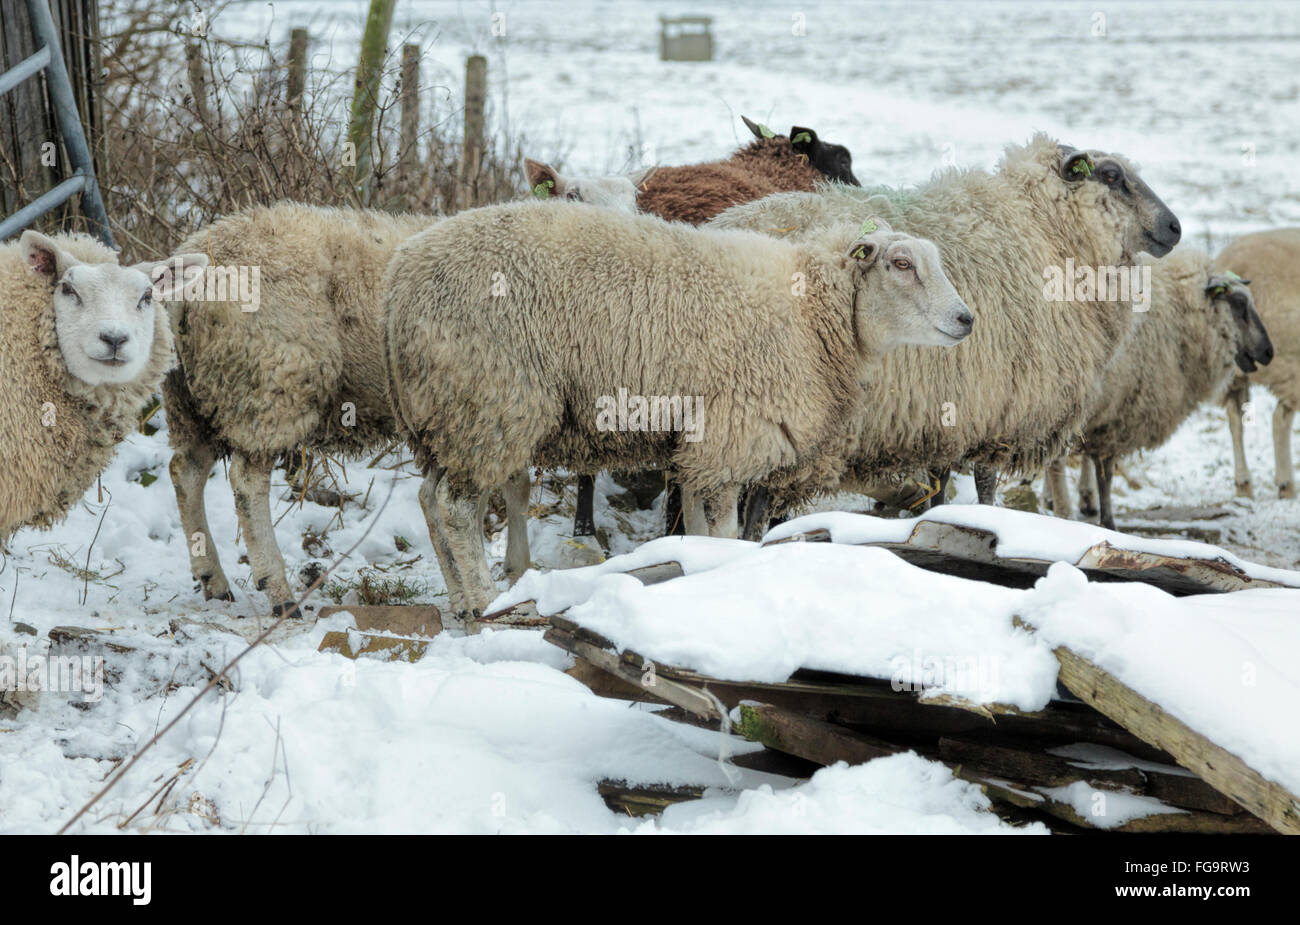 A flock of sheep in a snow-covered wintry landscape, Noordwijk, South Holland, The Netherlands. Stock Photo